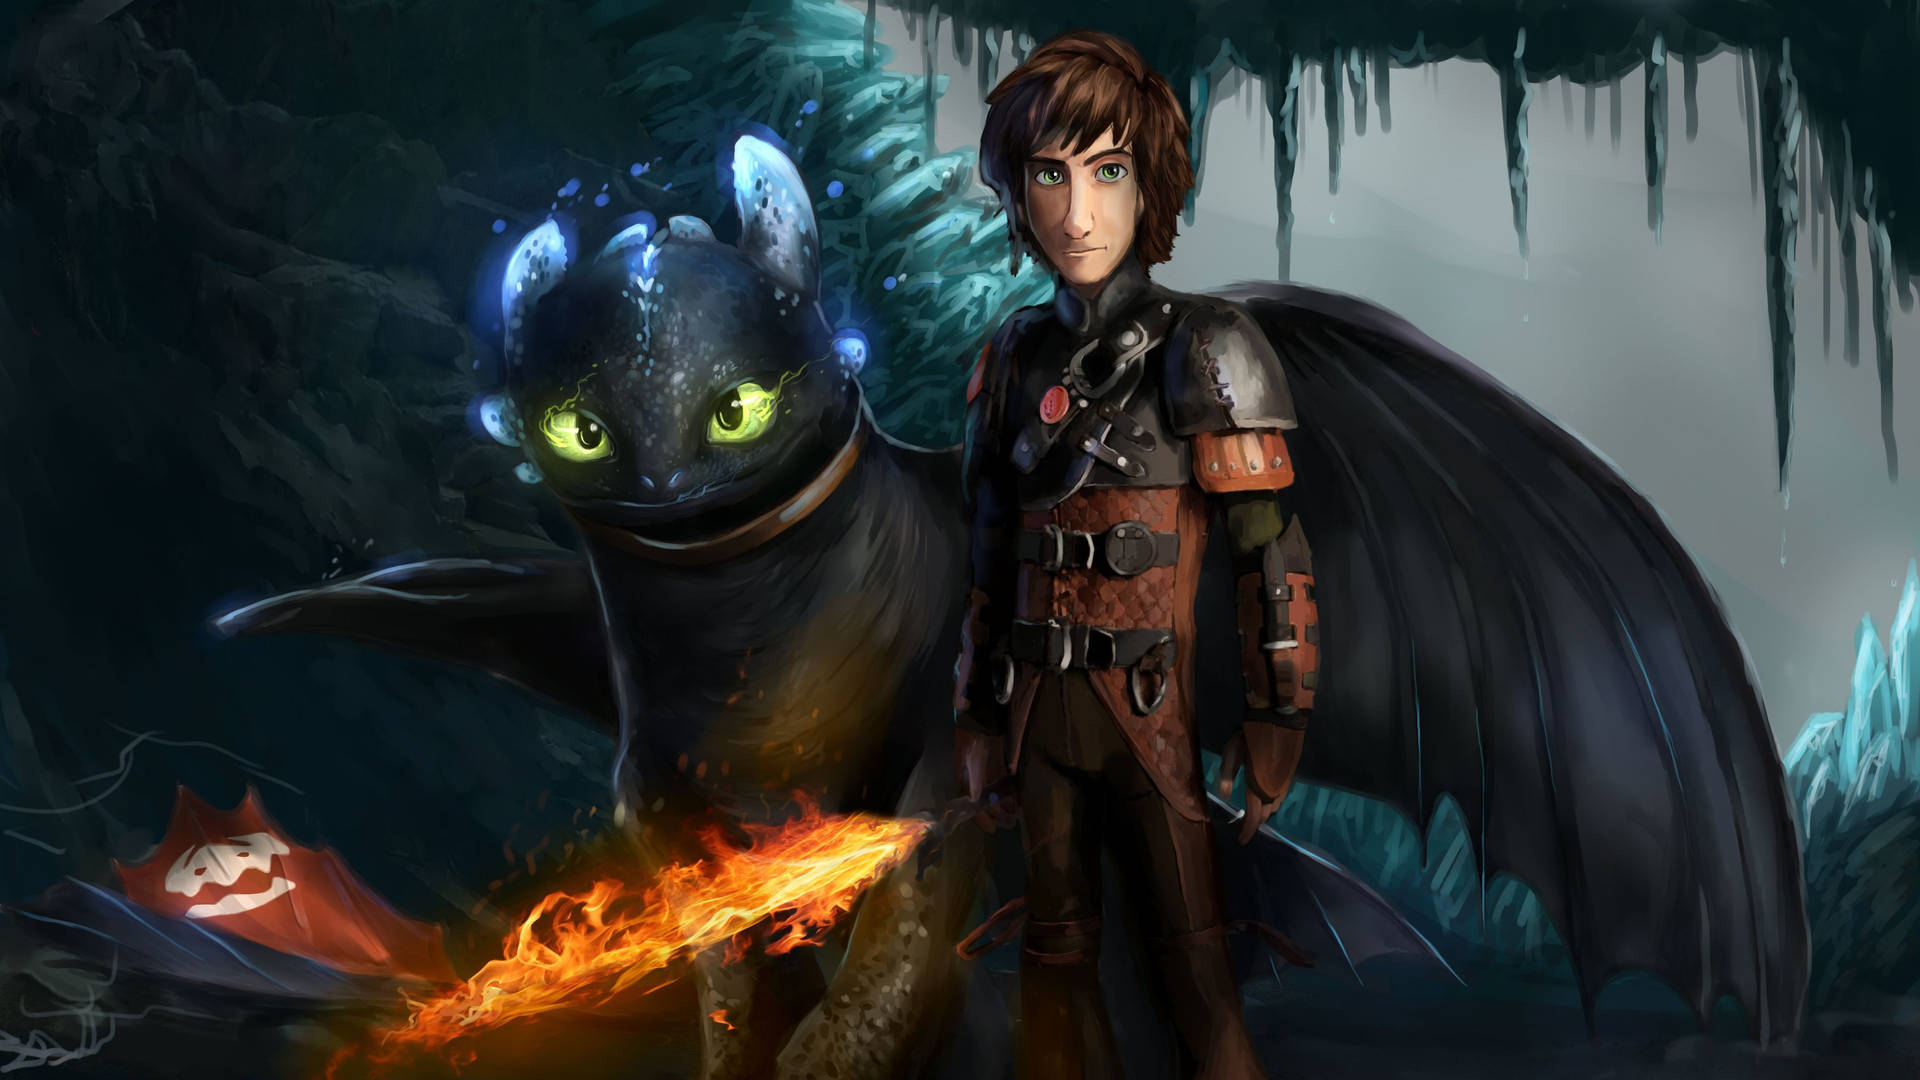 How To Train Your Dragon digital fan art of Toothless and Hiccup in the Hidden World wallpaper.